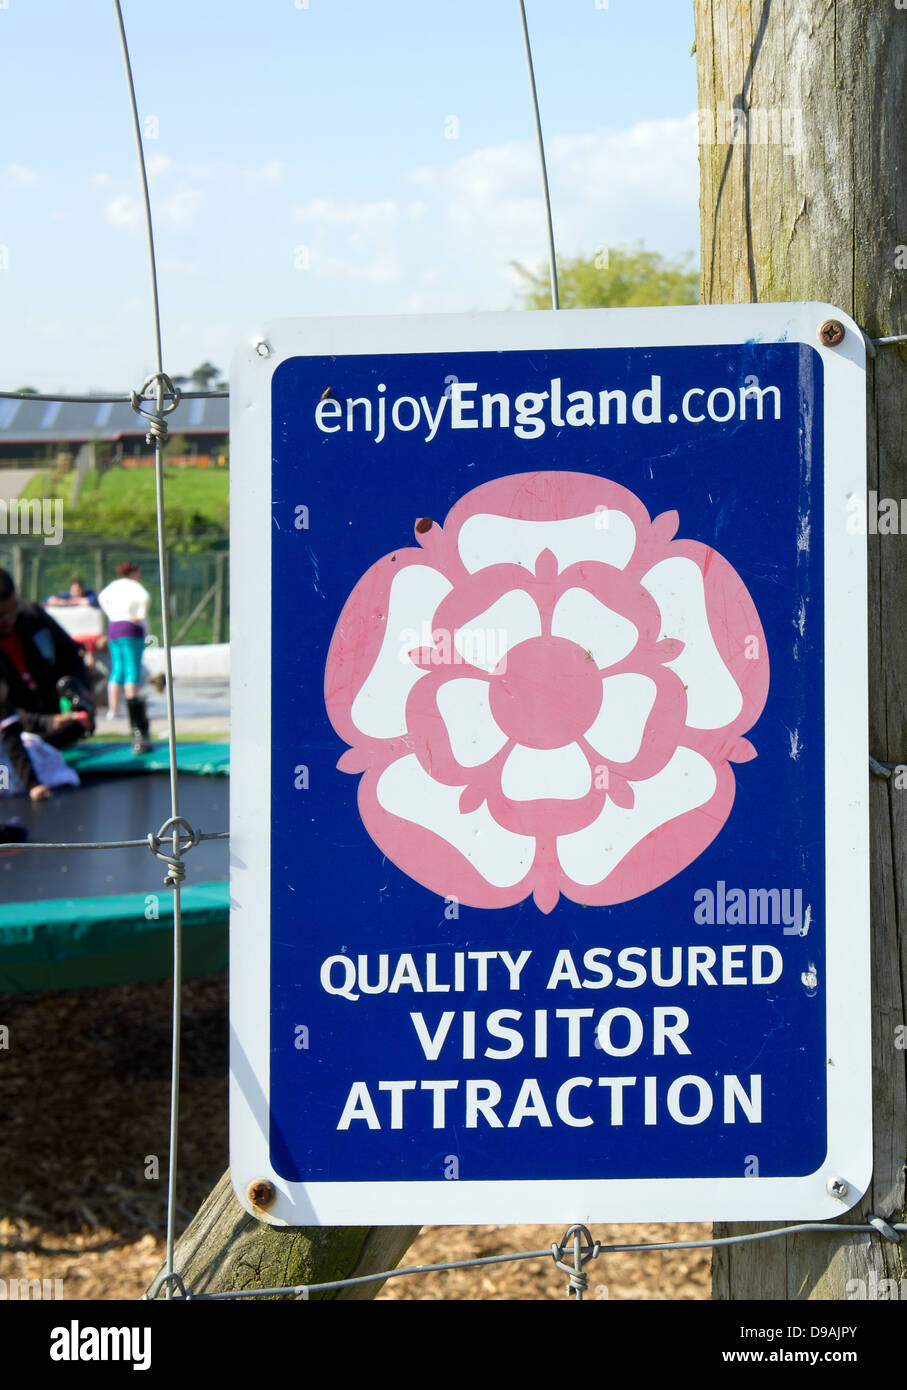 Enjoy England Quality Assured Visitor Attraction Sign at Noah's Ark Zoo Farm, Bristol, UK Stock Photo